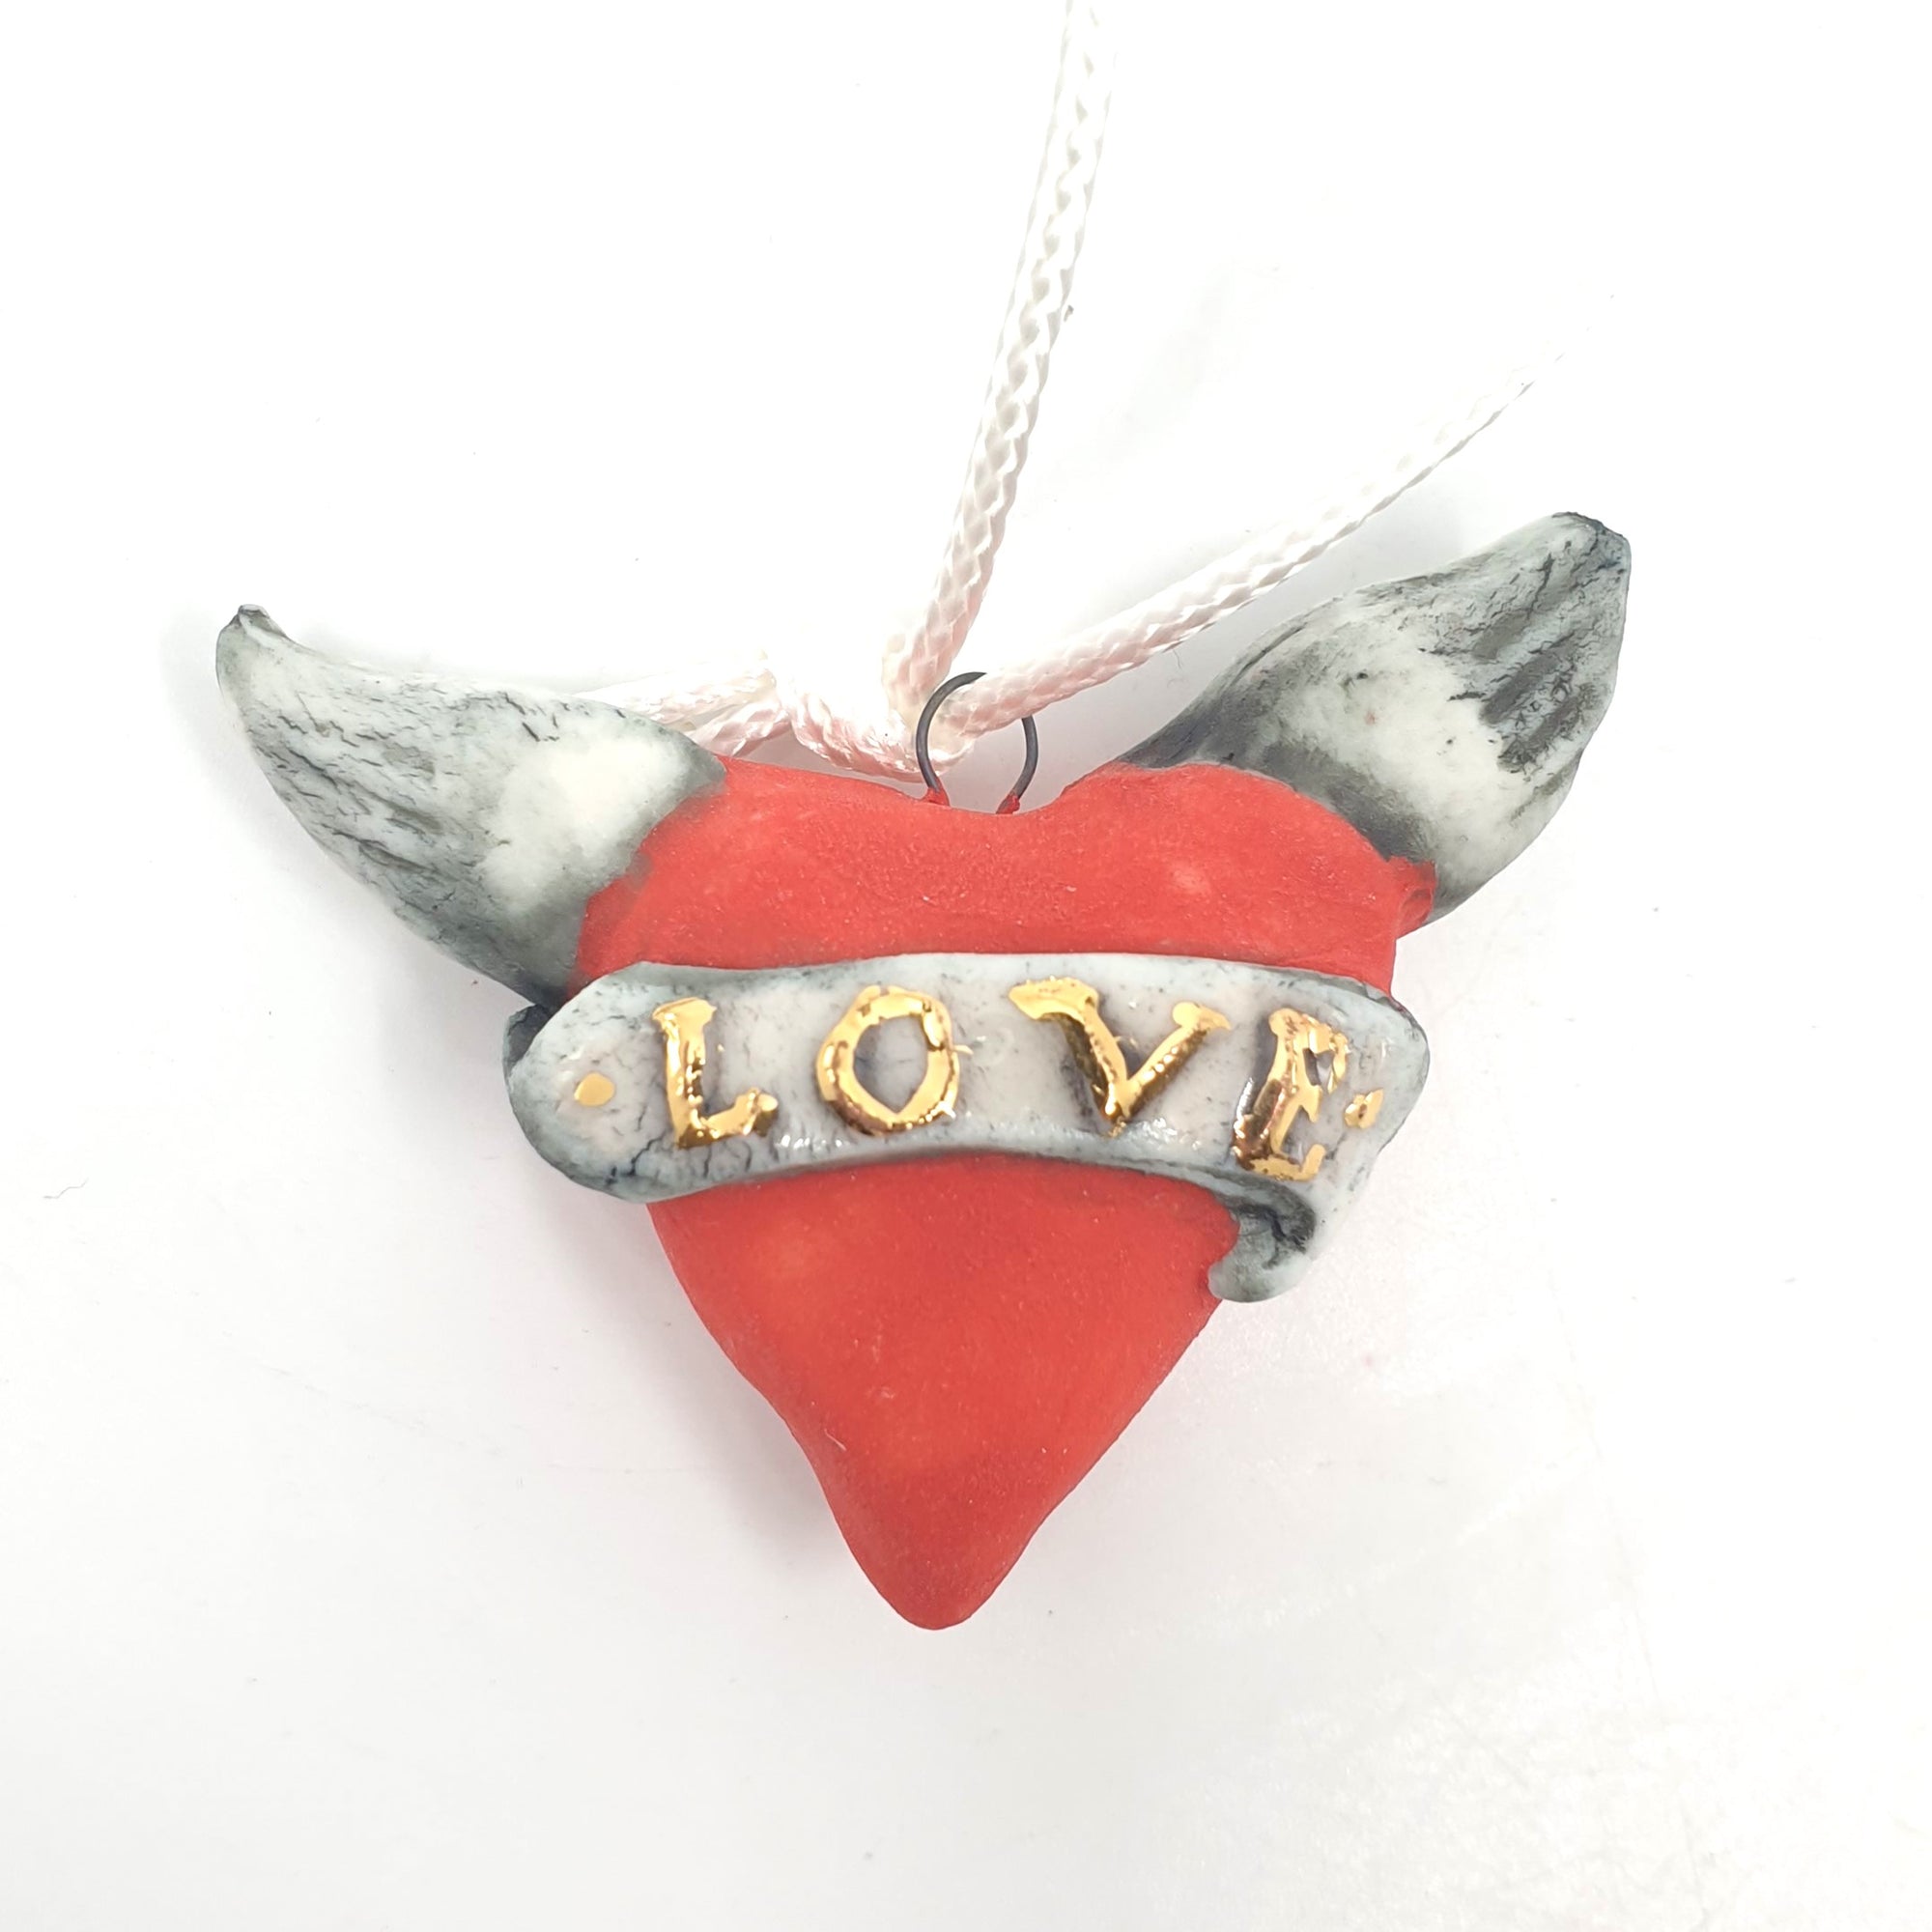 Red love heart with wings hanging ornament